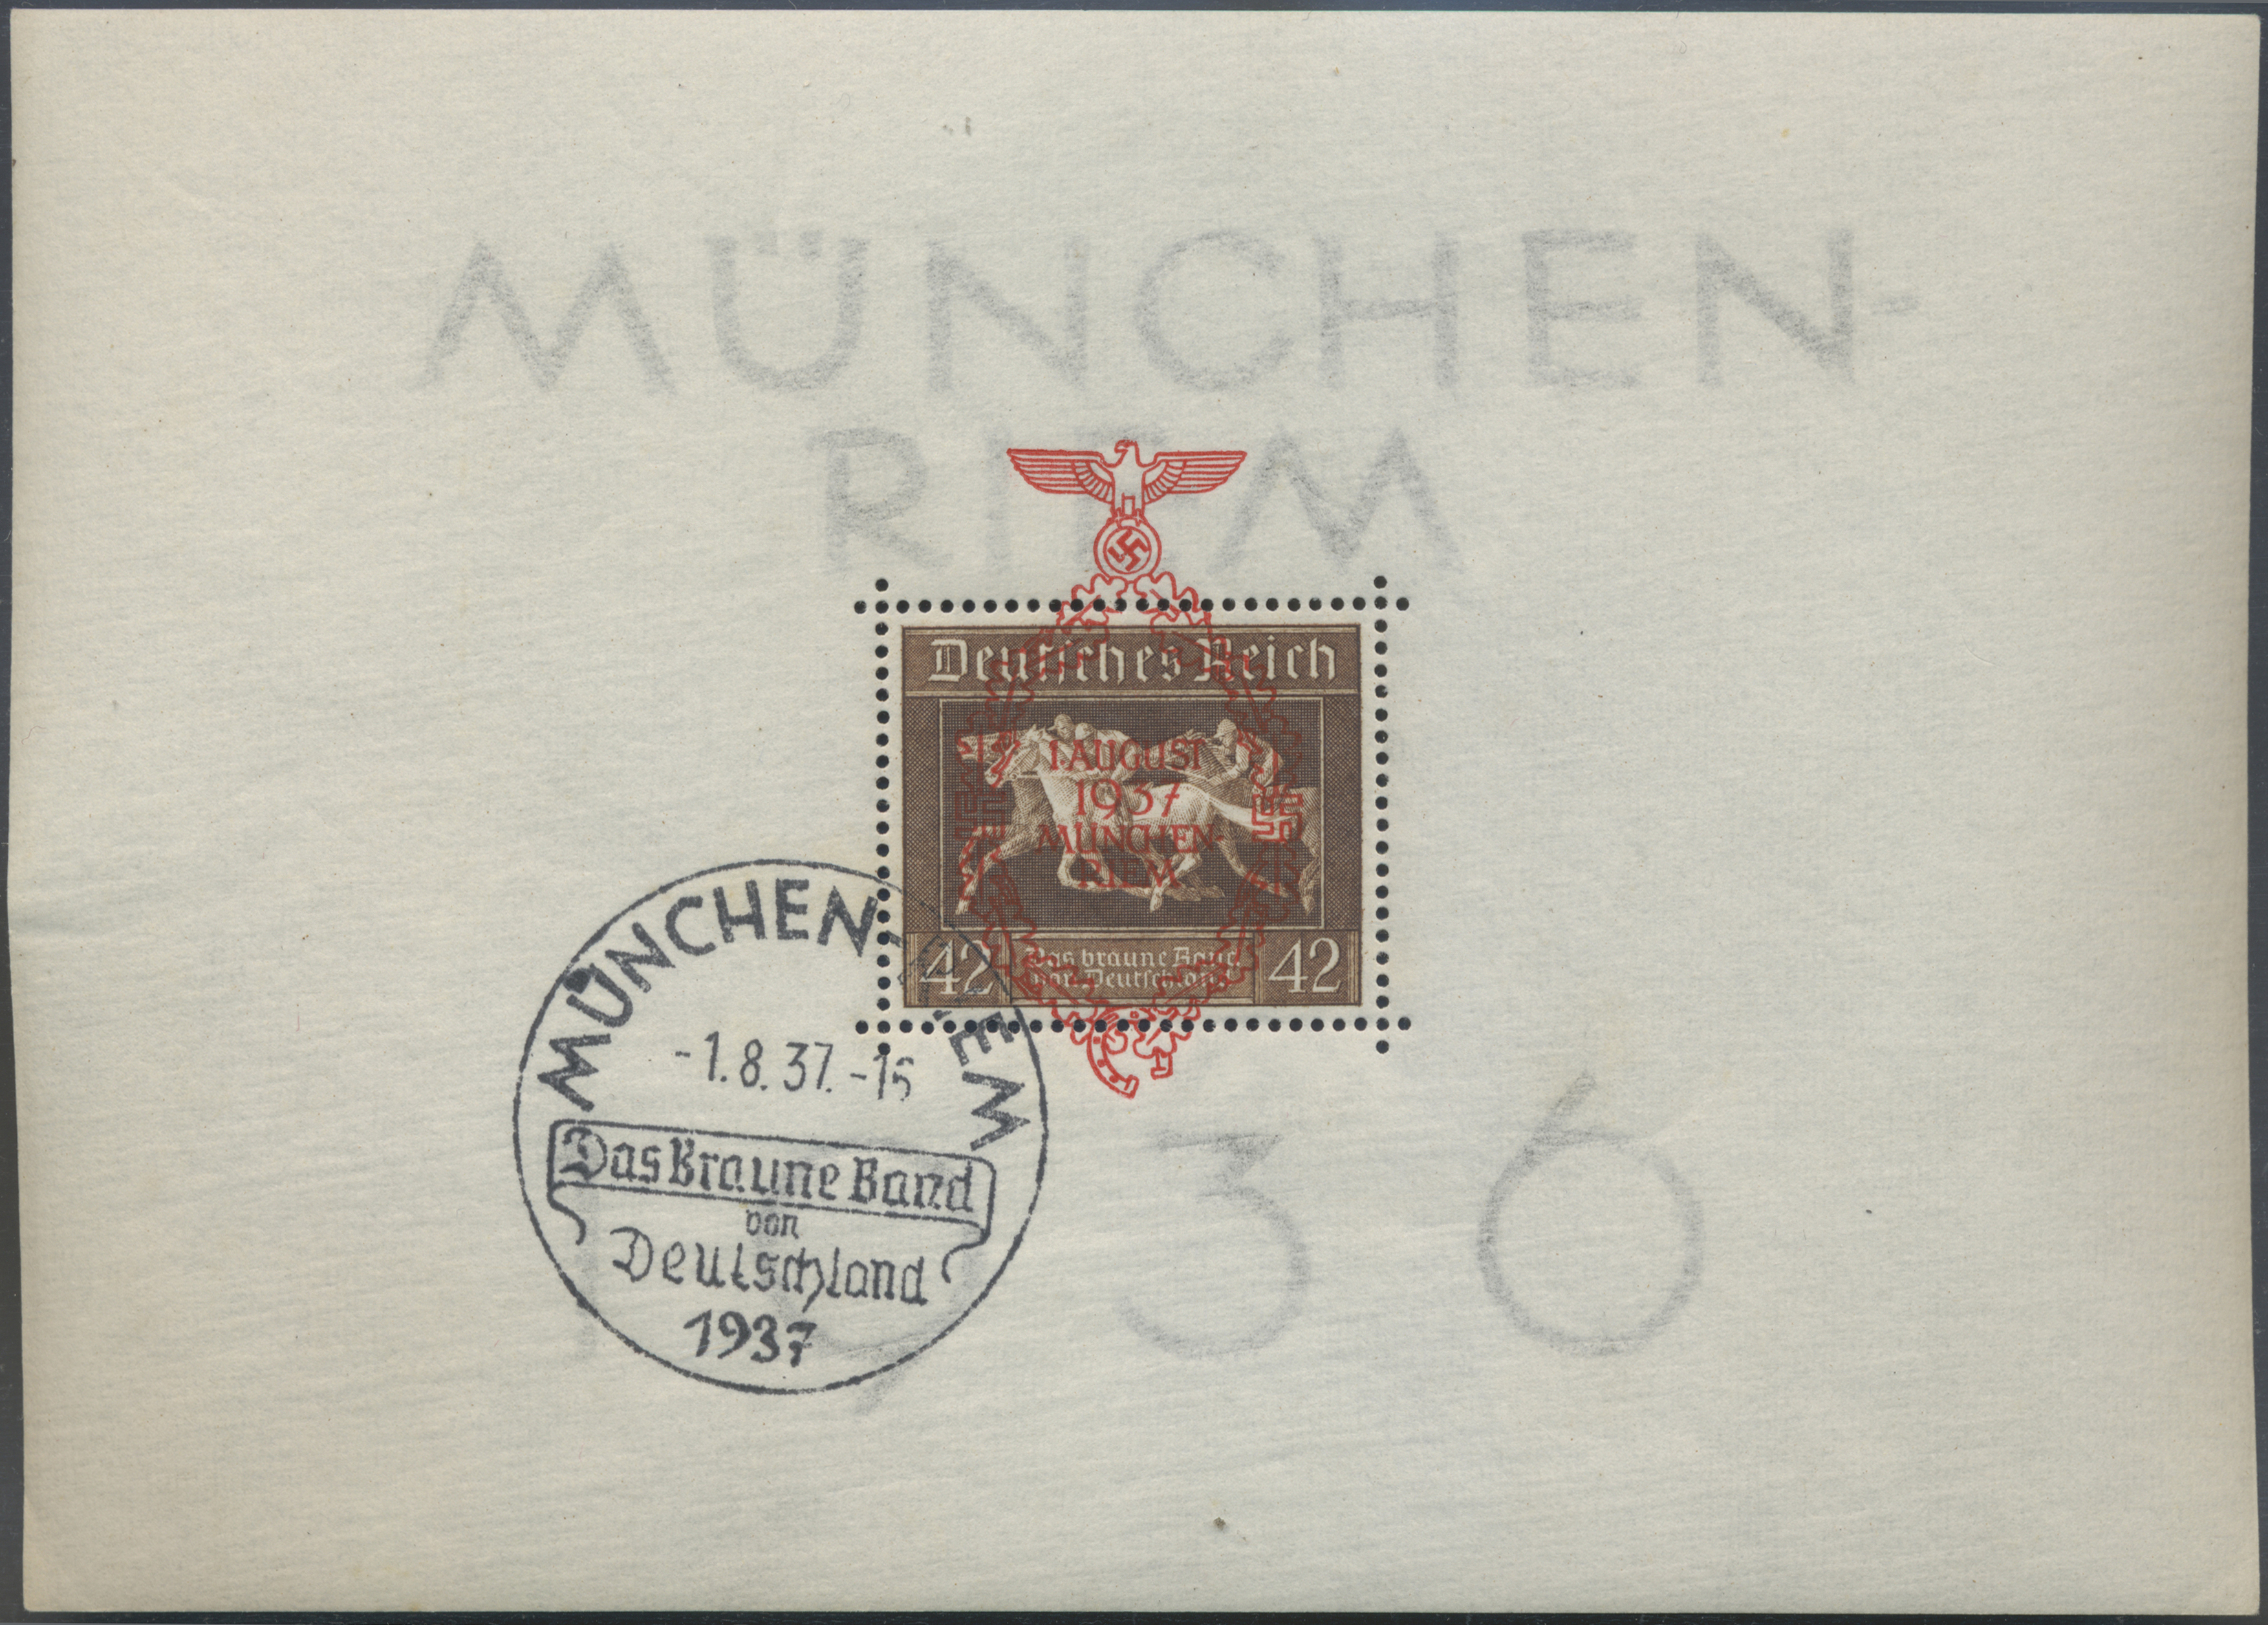 Lot 36519 - Deutsches Reich  -  Auktionshaus Christoph Gärtner GmbH & Co. KG Sale #44 Collections Germany